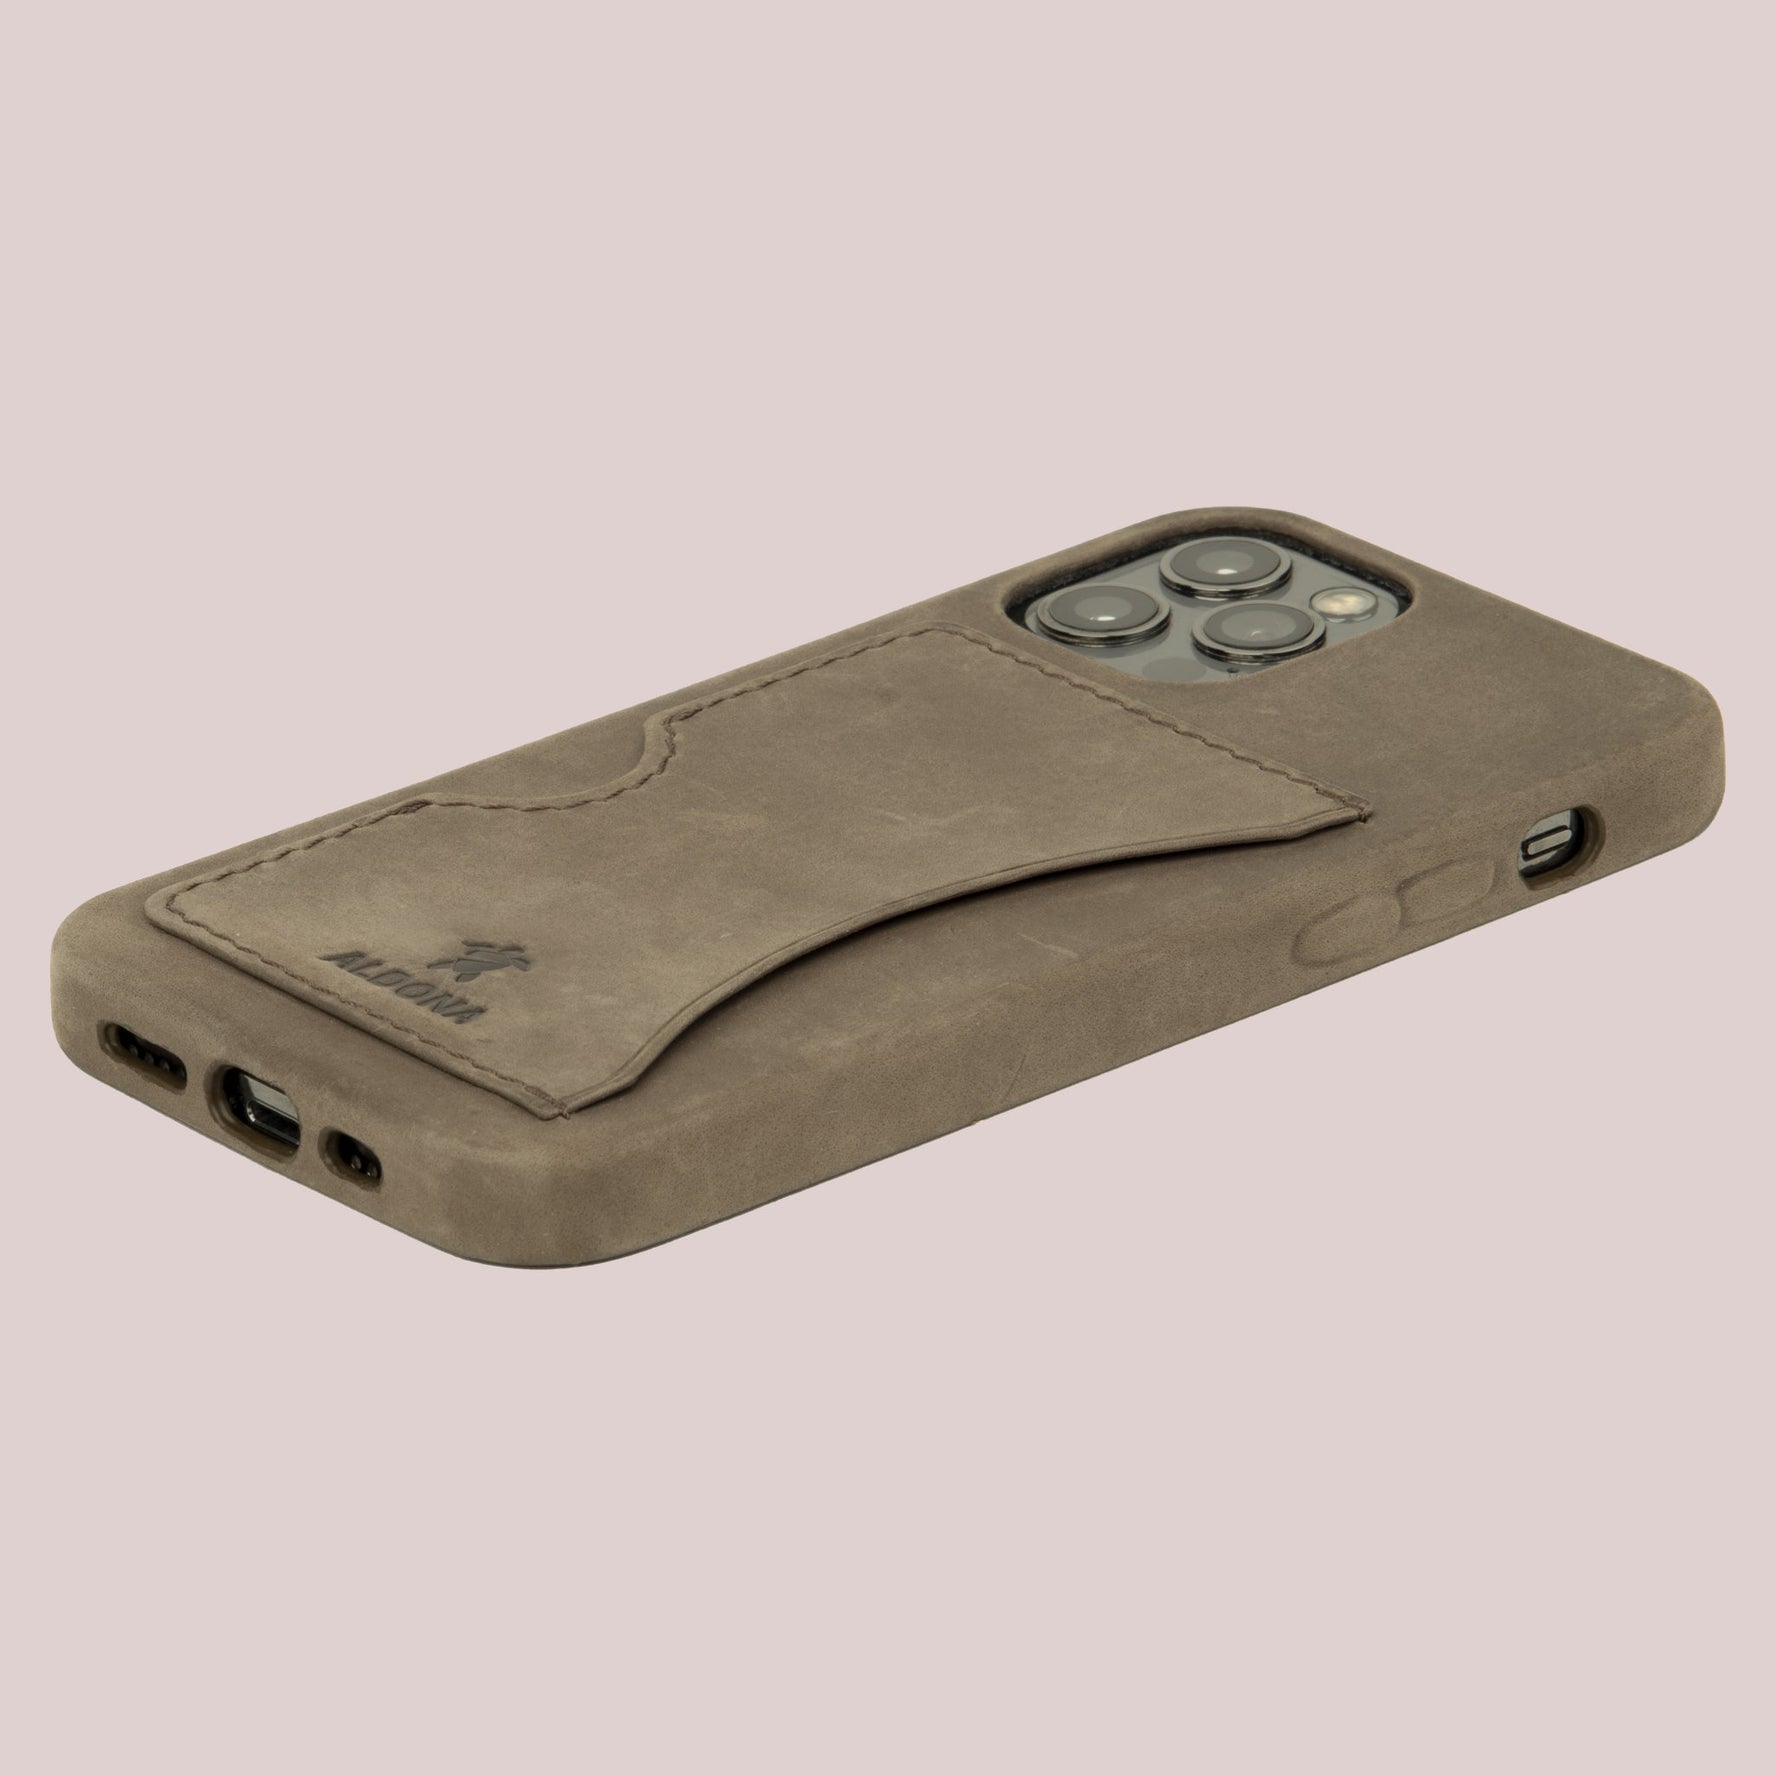 Baxter Card Case for iPhone 12 Pro - Burnt Tobacco